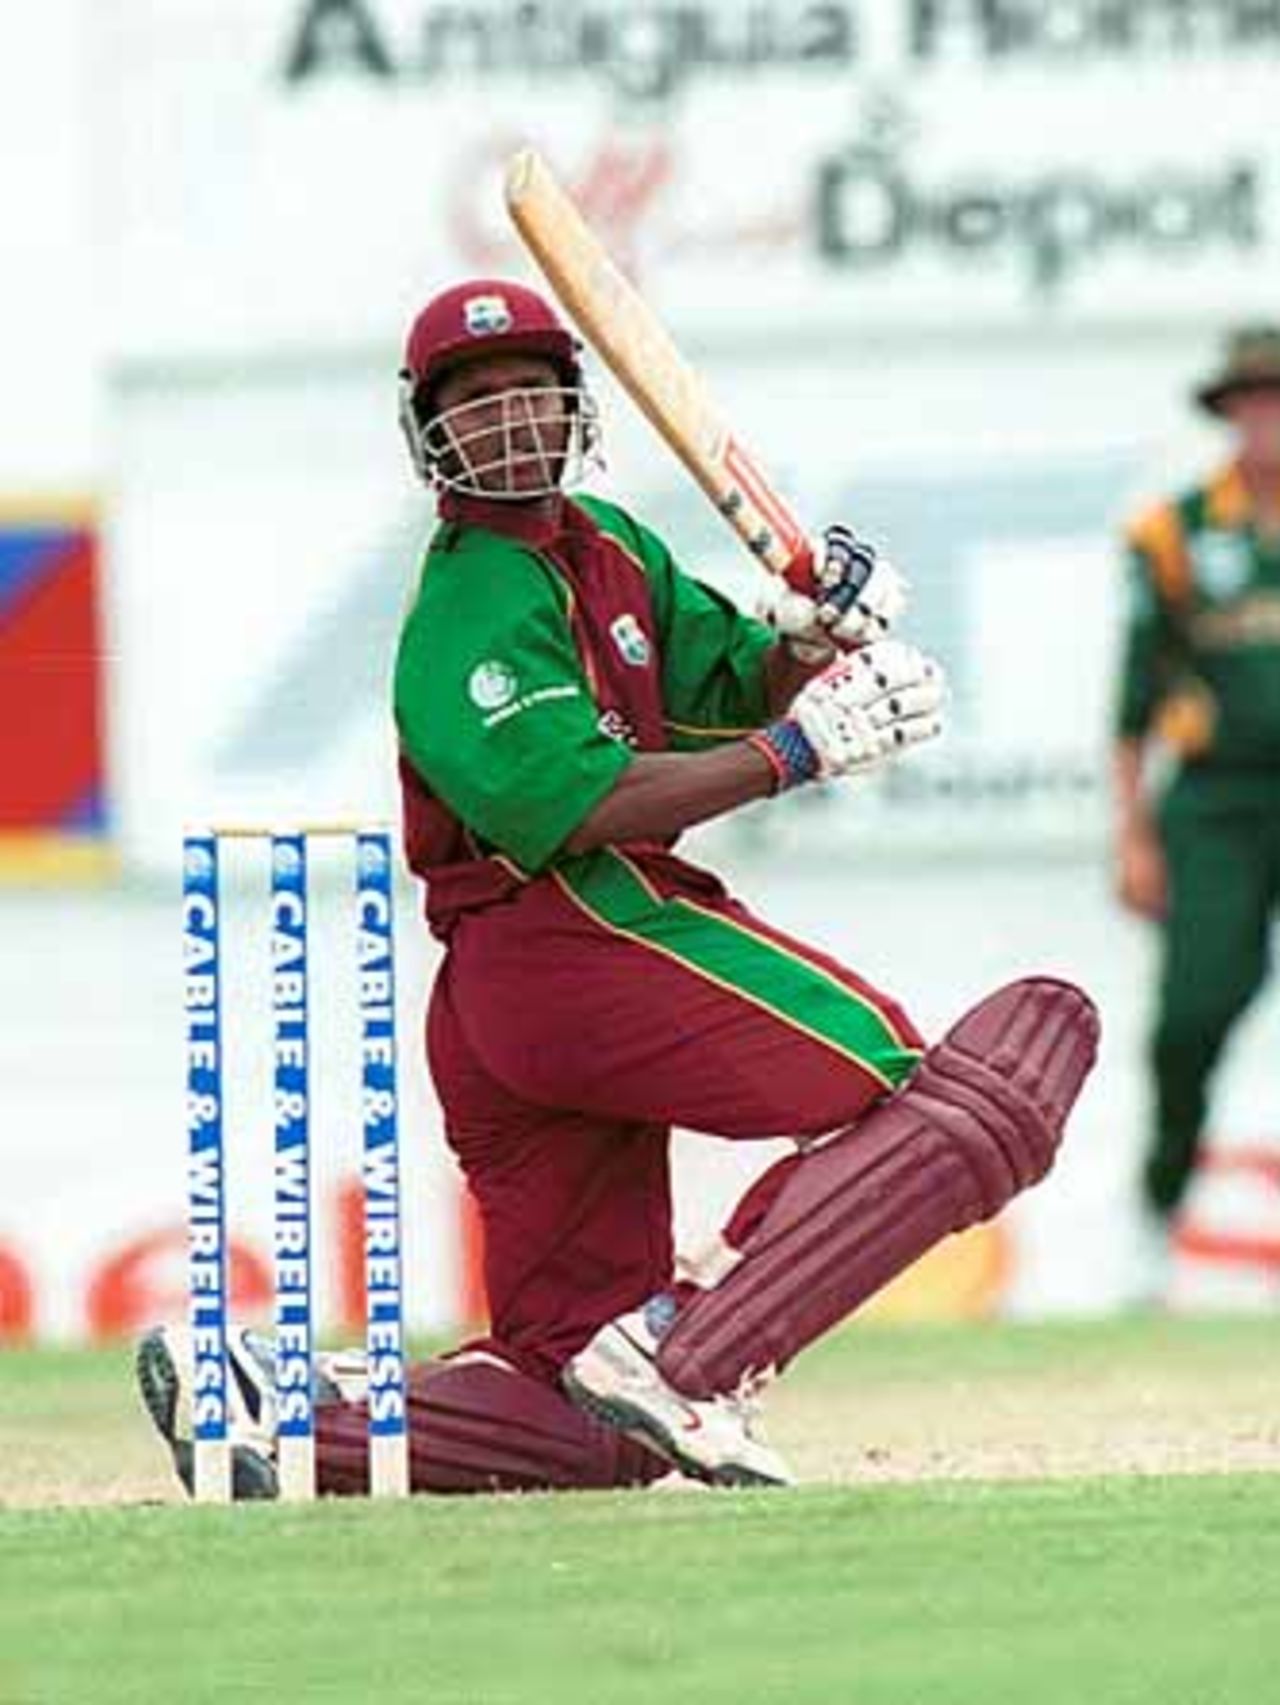 West Indies v South Africa, 2nd ODI at Antigua Recreation Ground, St John's Antigua, 2 May 2001